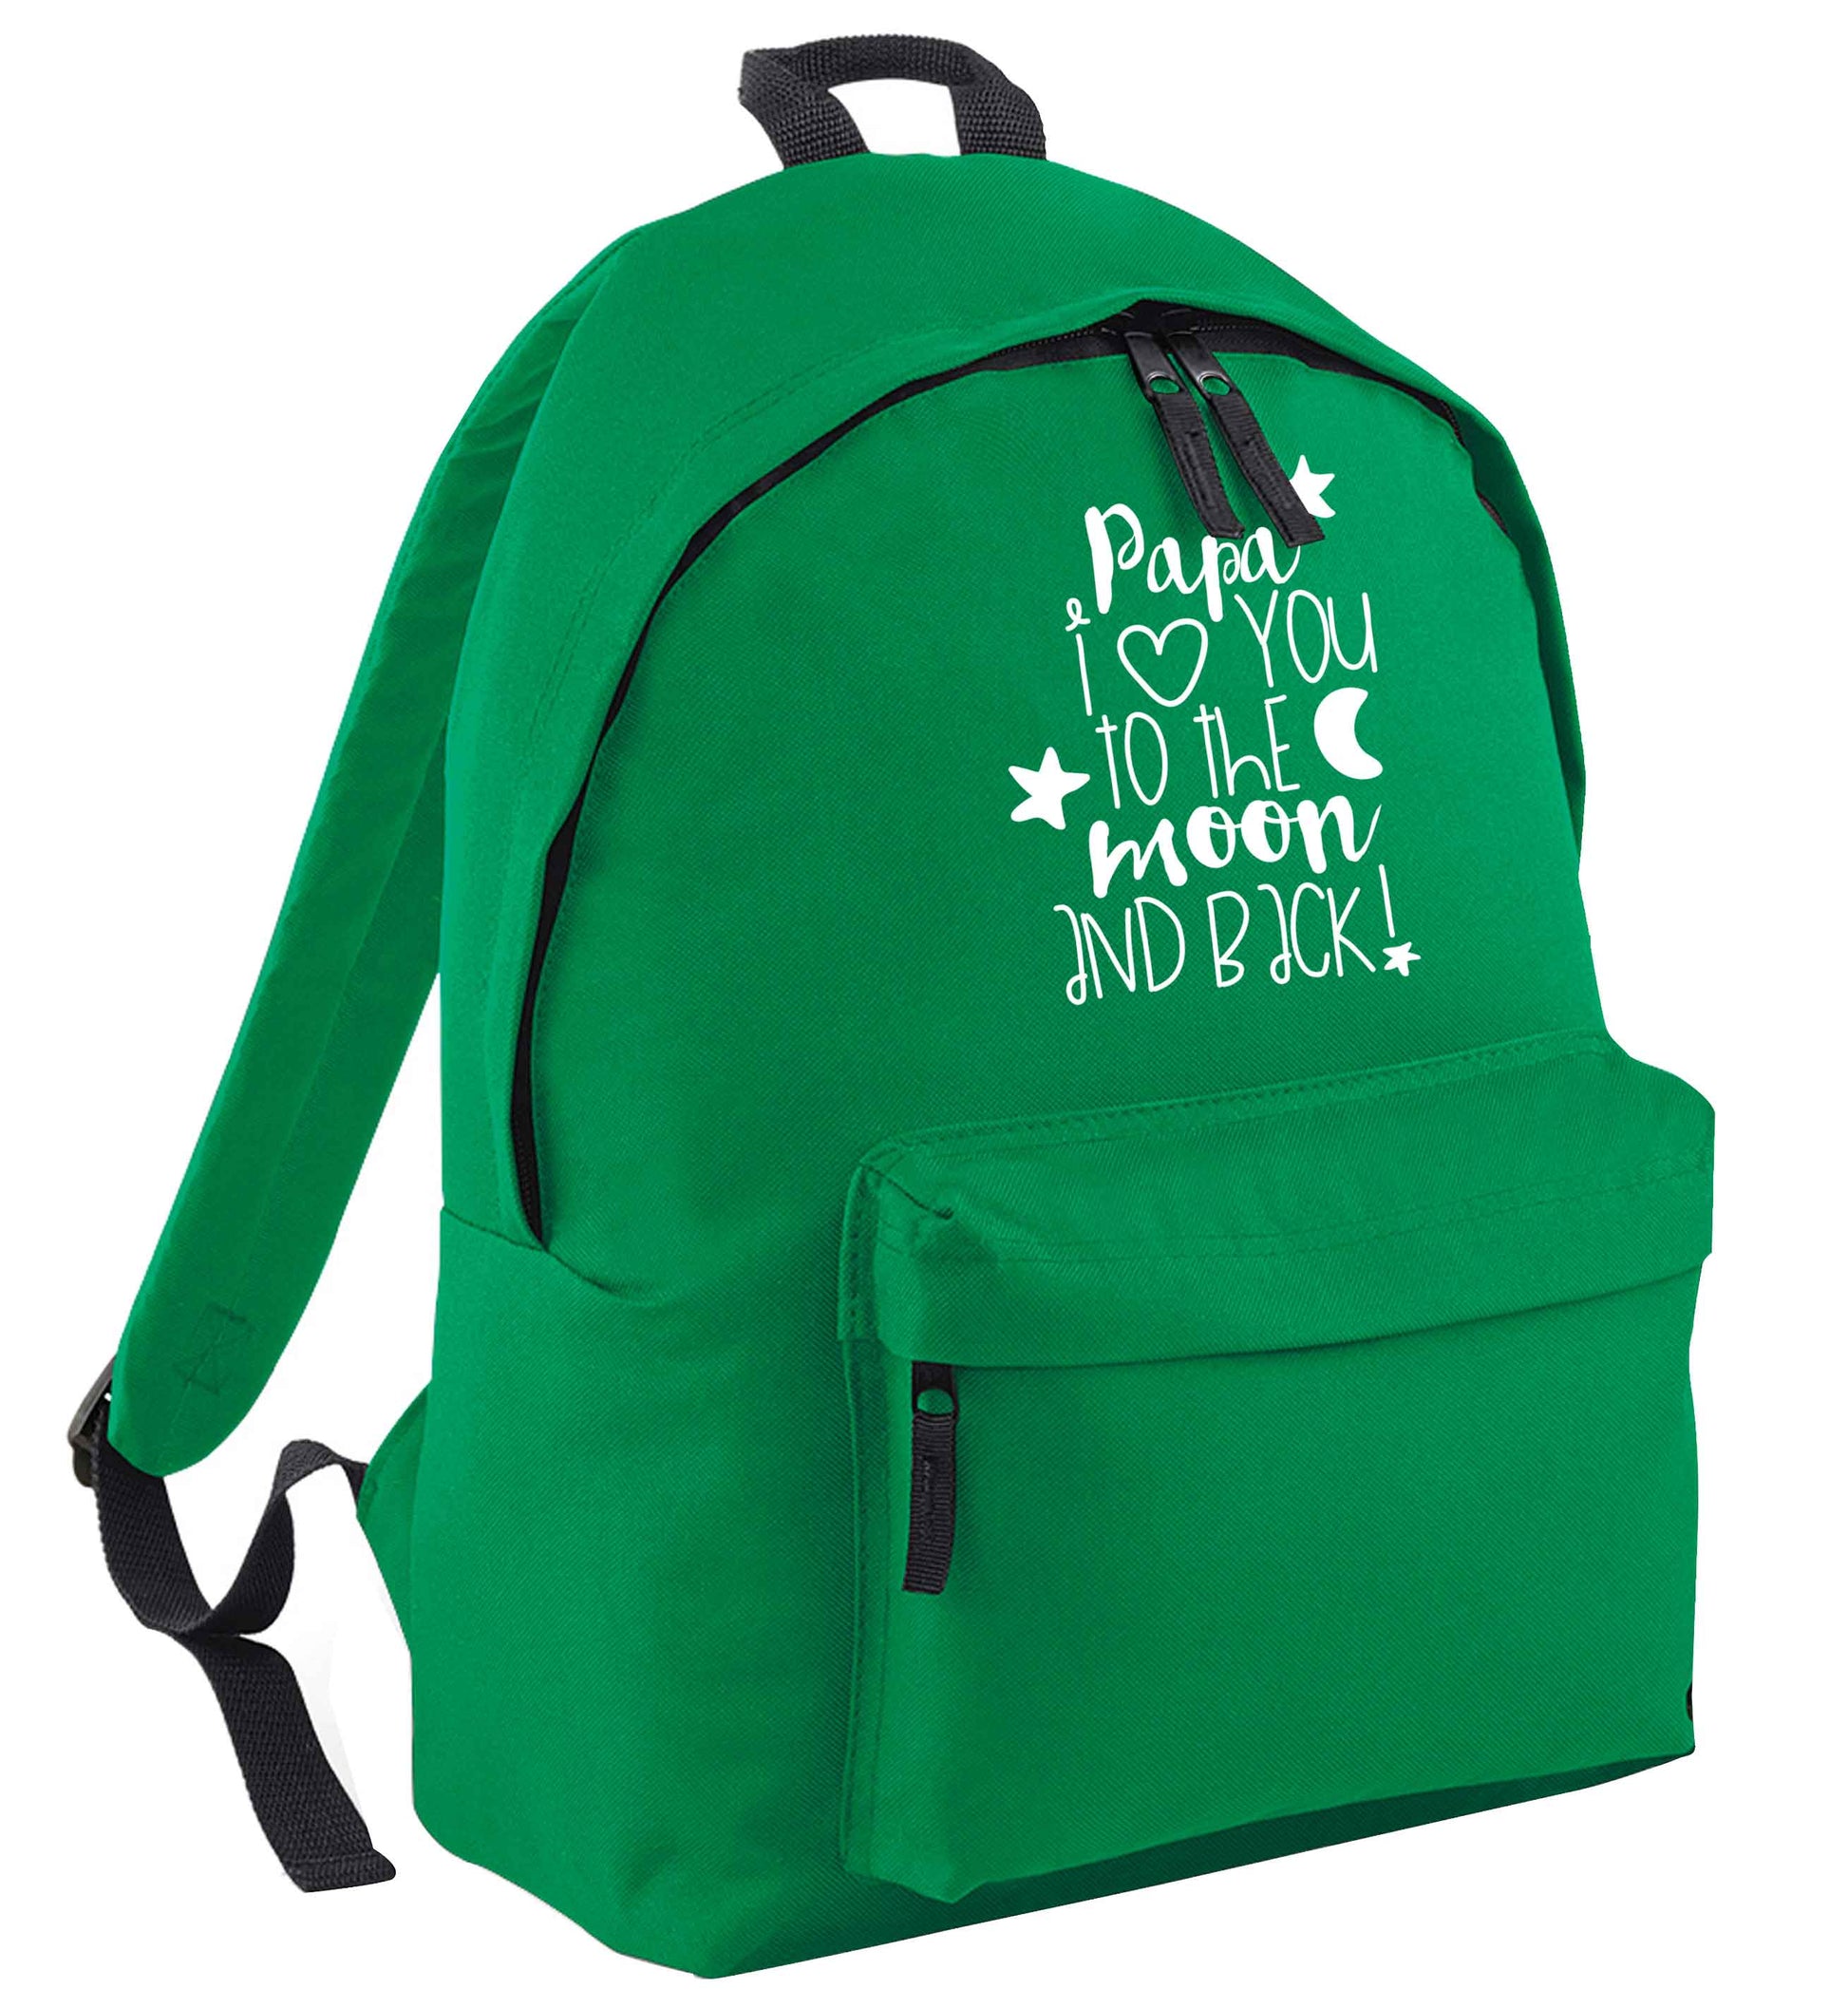 Papa I love you to the moon and back green adults backpack